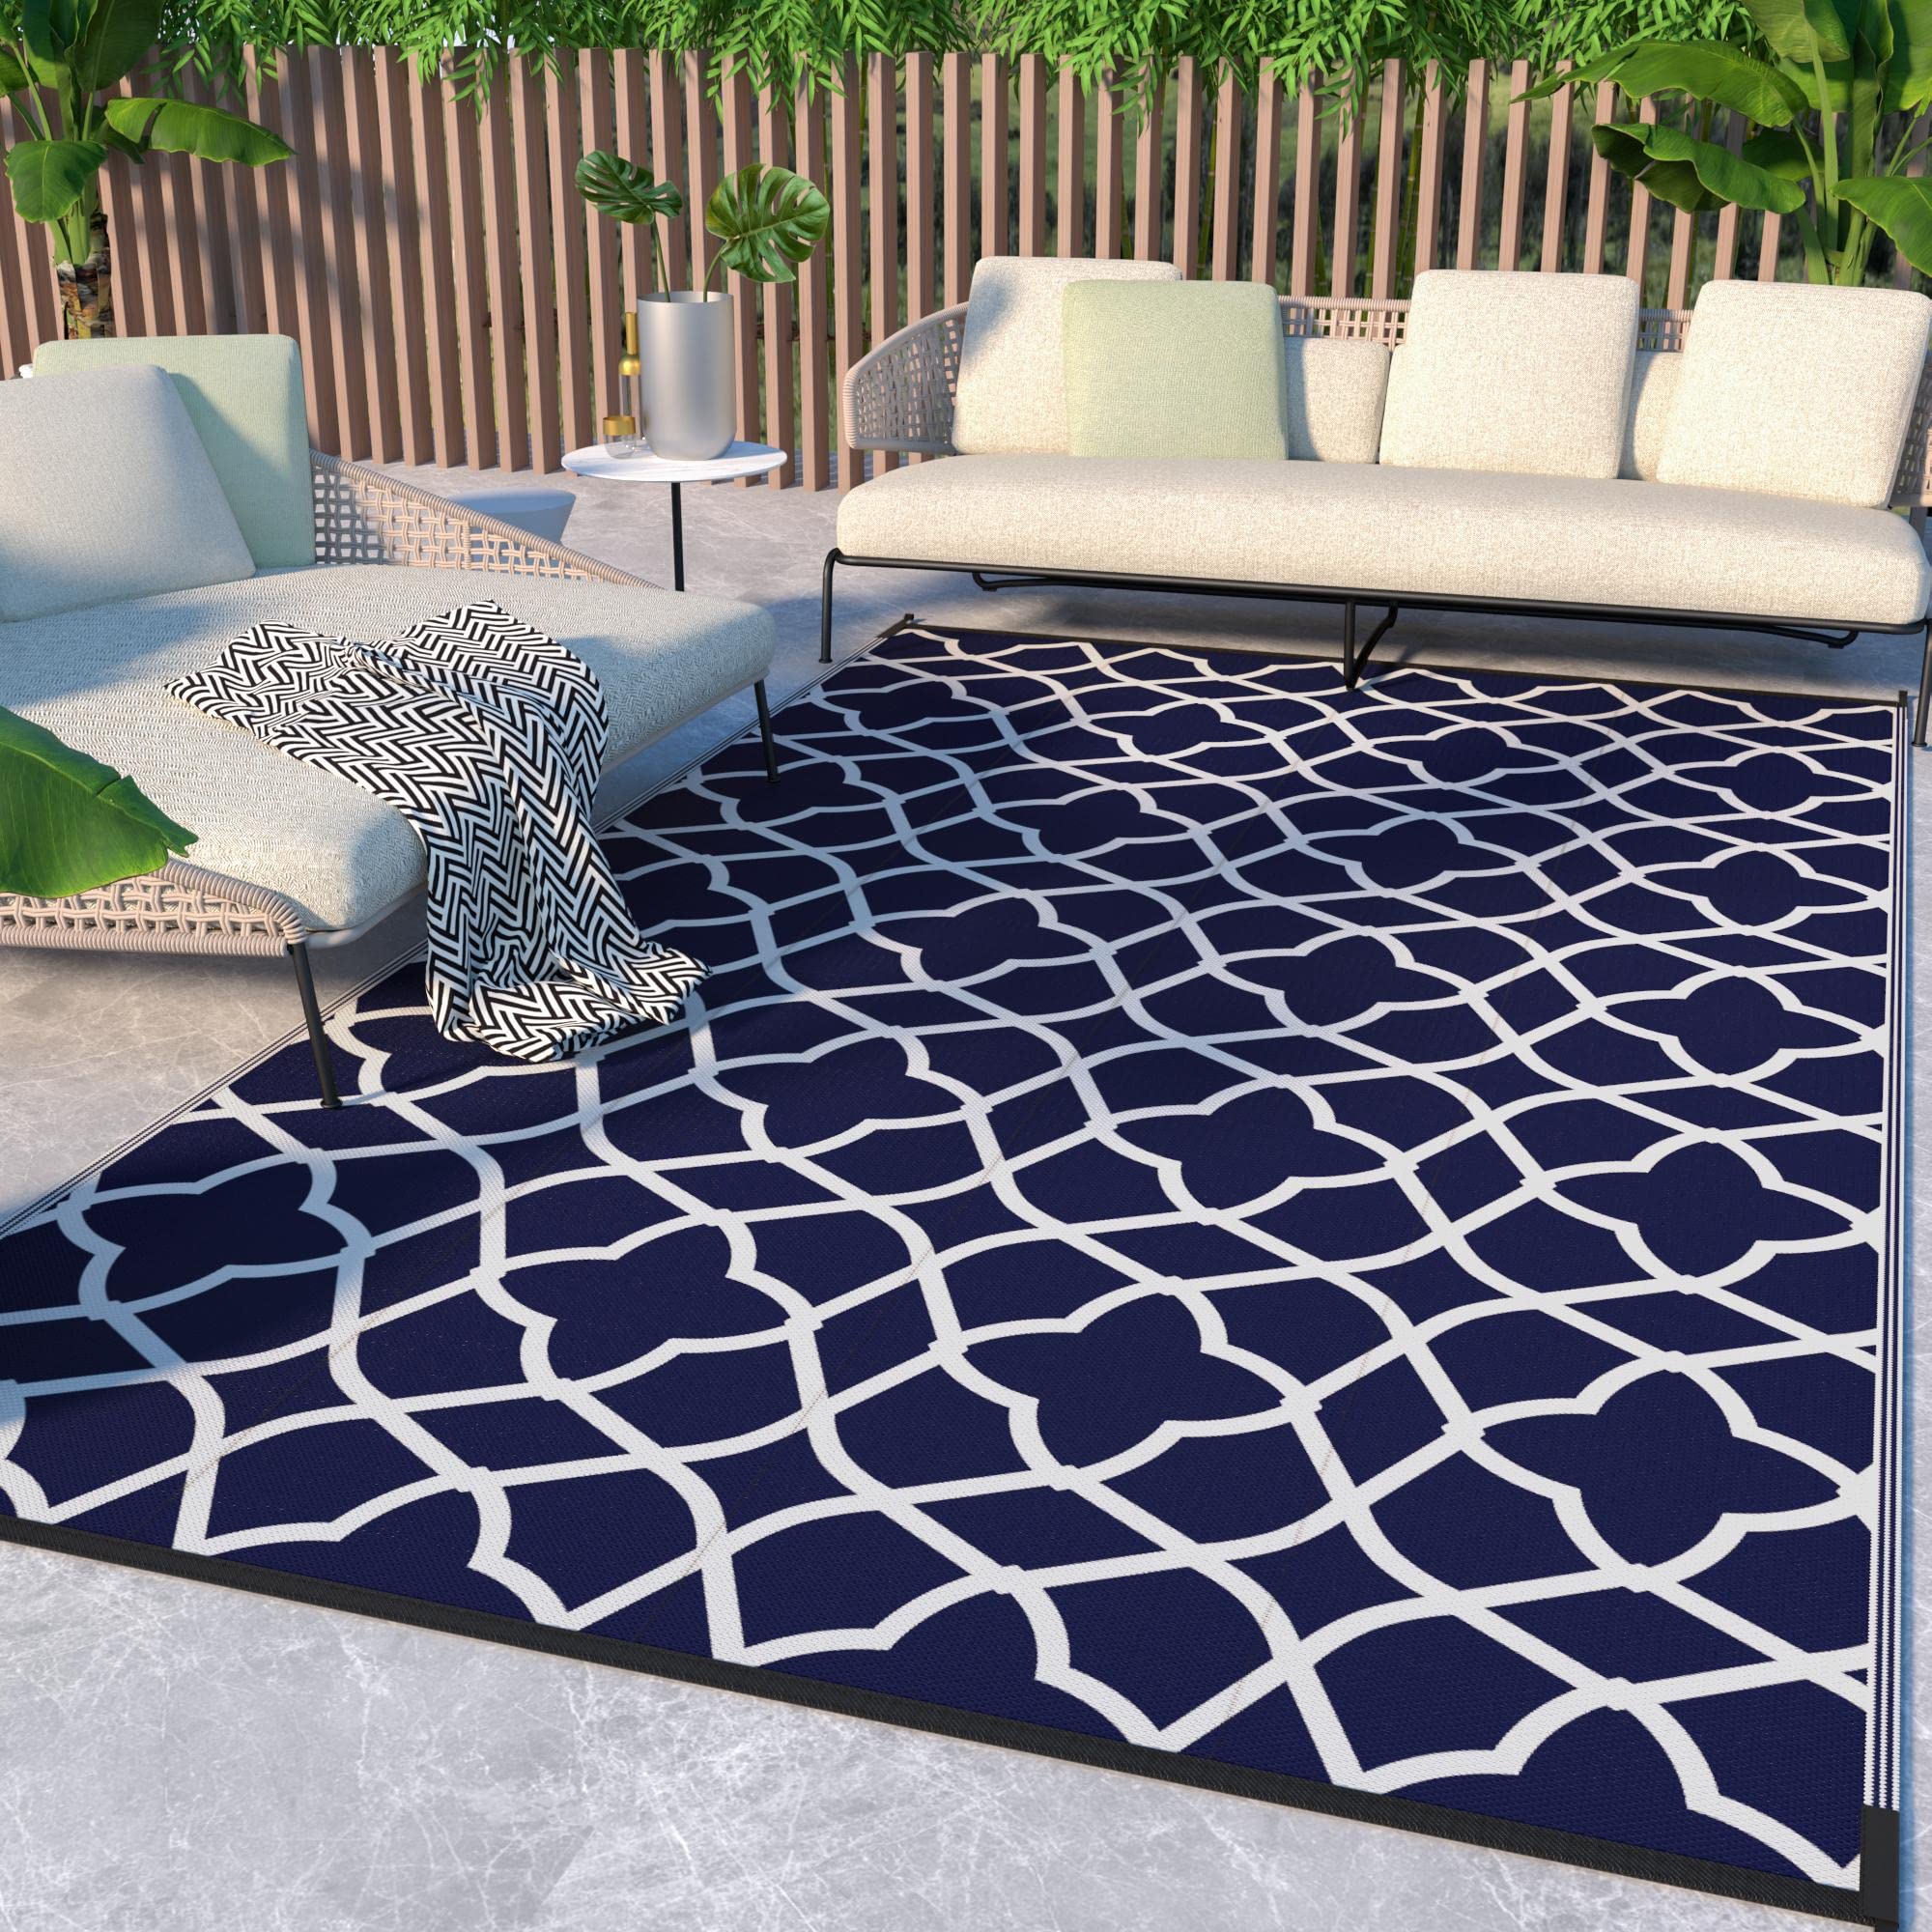 GENIMO Outdoor Rugs, 6'x9' Reversible Plastic Straw Patios Clearance  Camping Mat RV Navy Blue  White